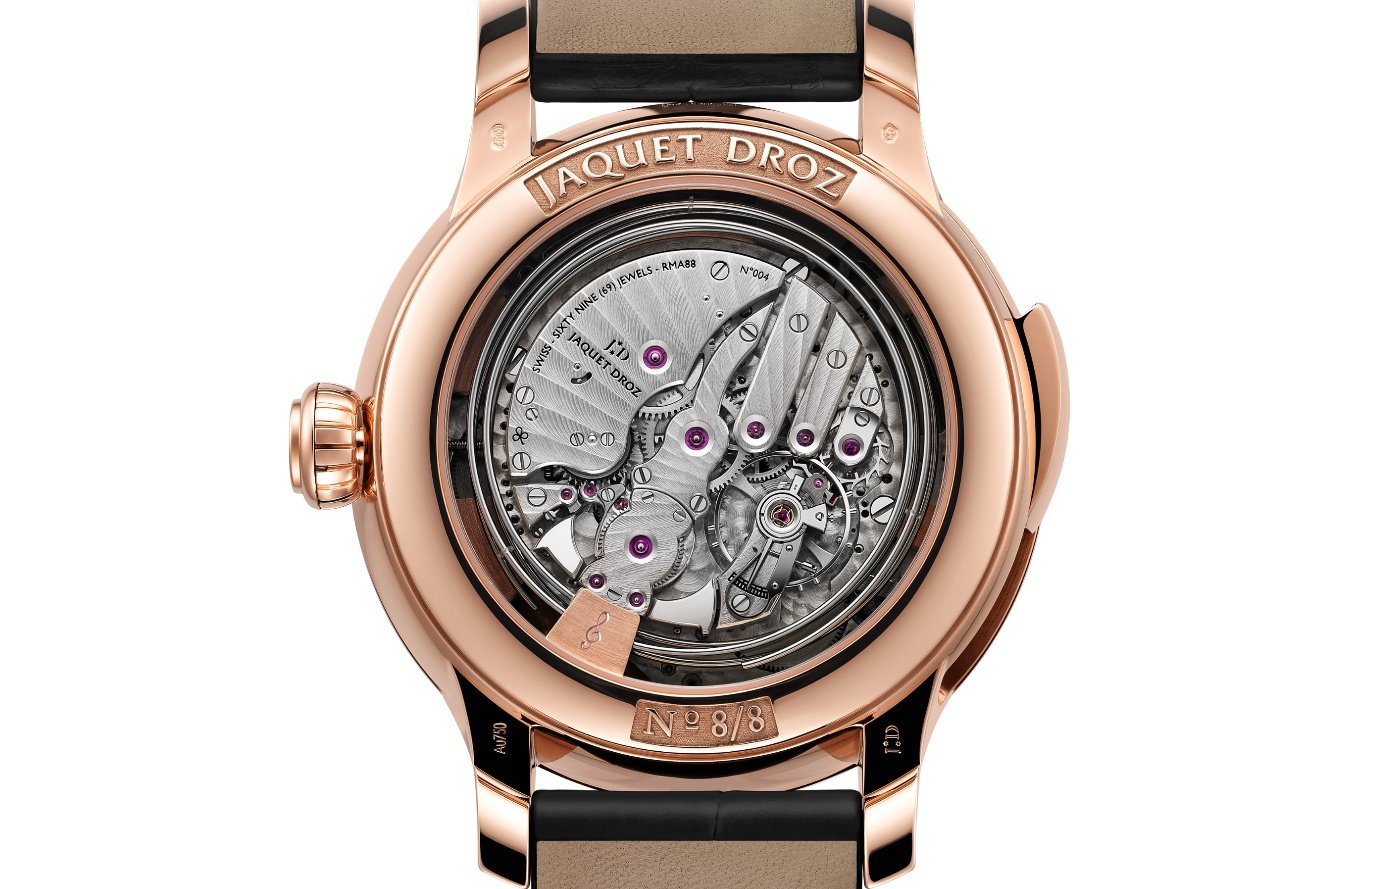 Jaquet Droz celebrates the 300th anniversary of its founder